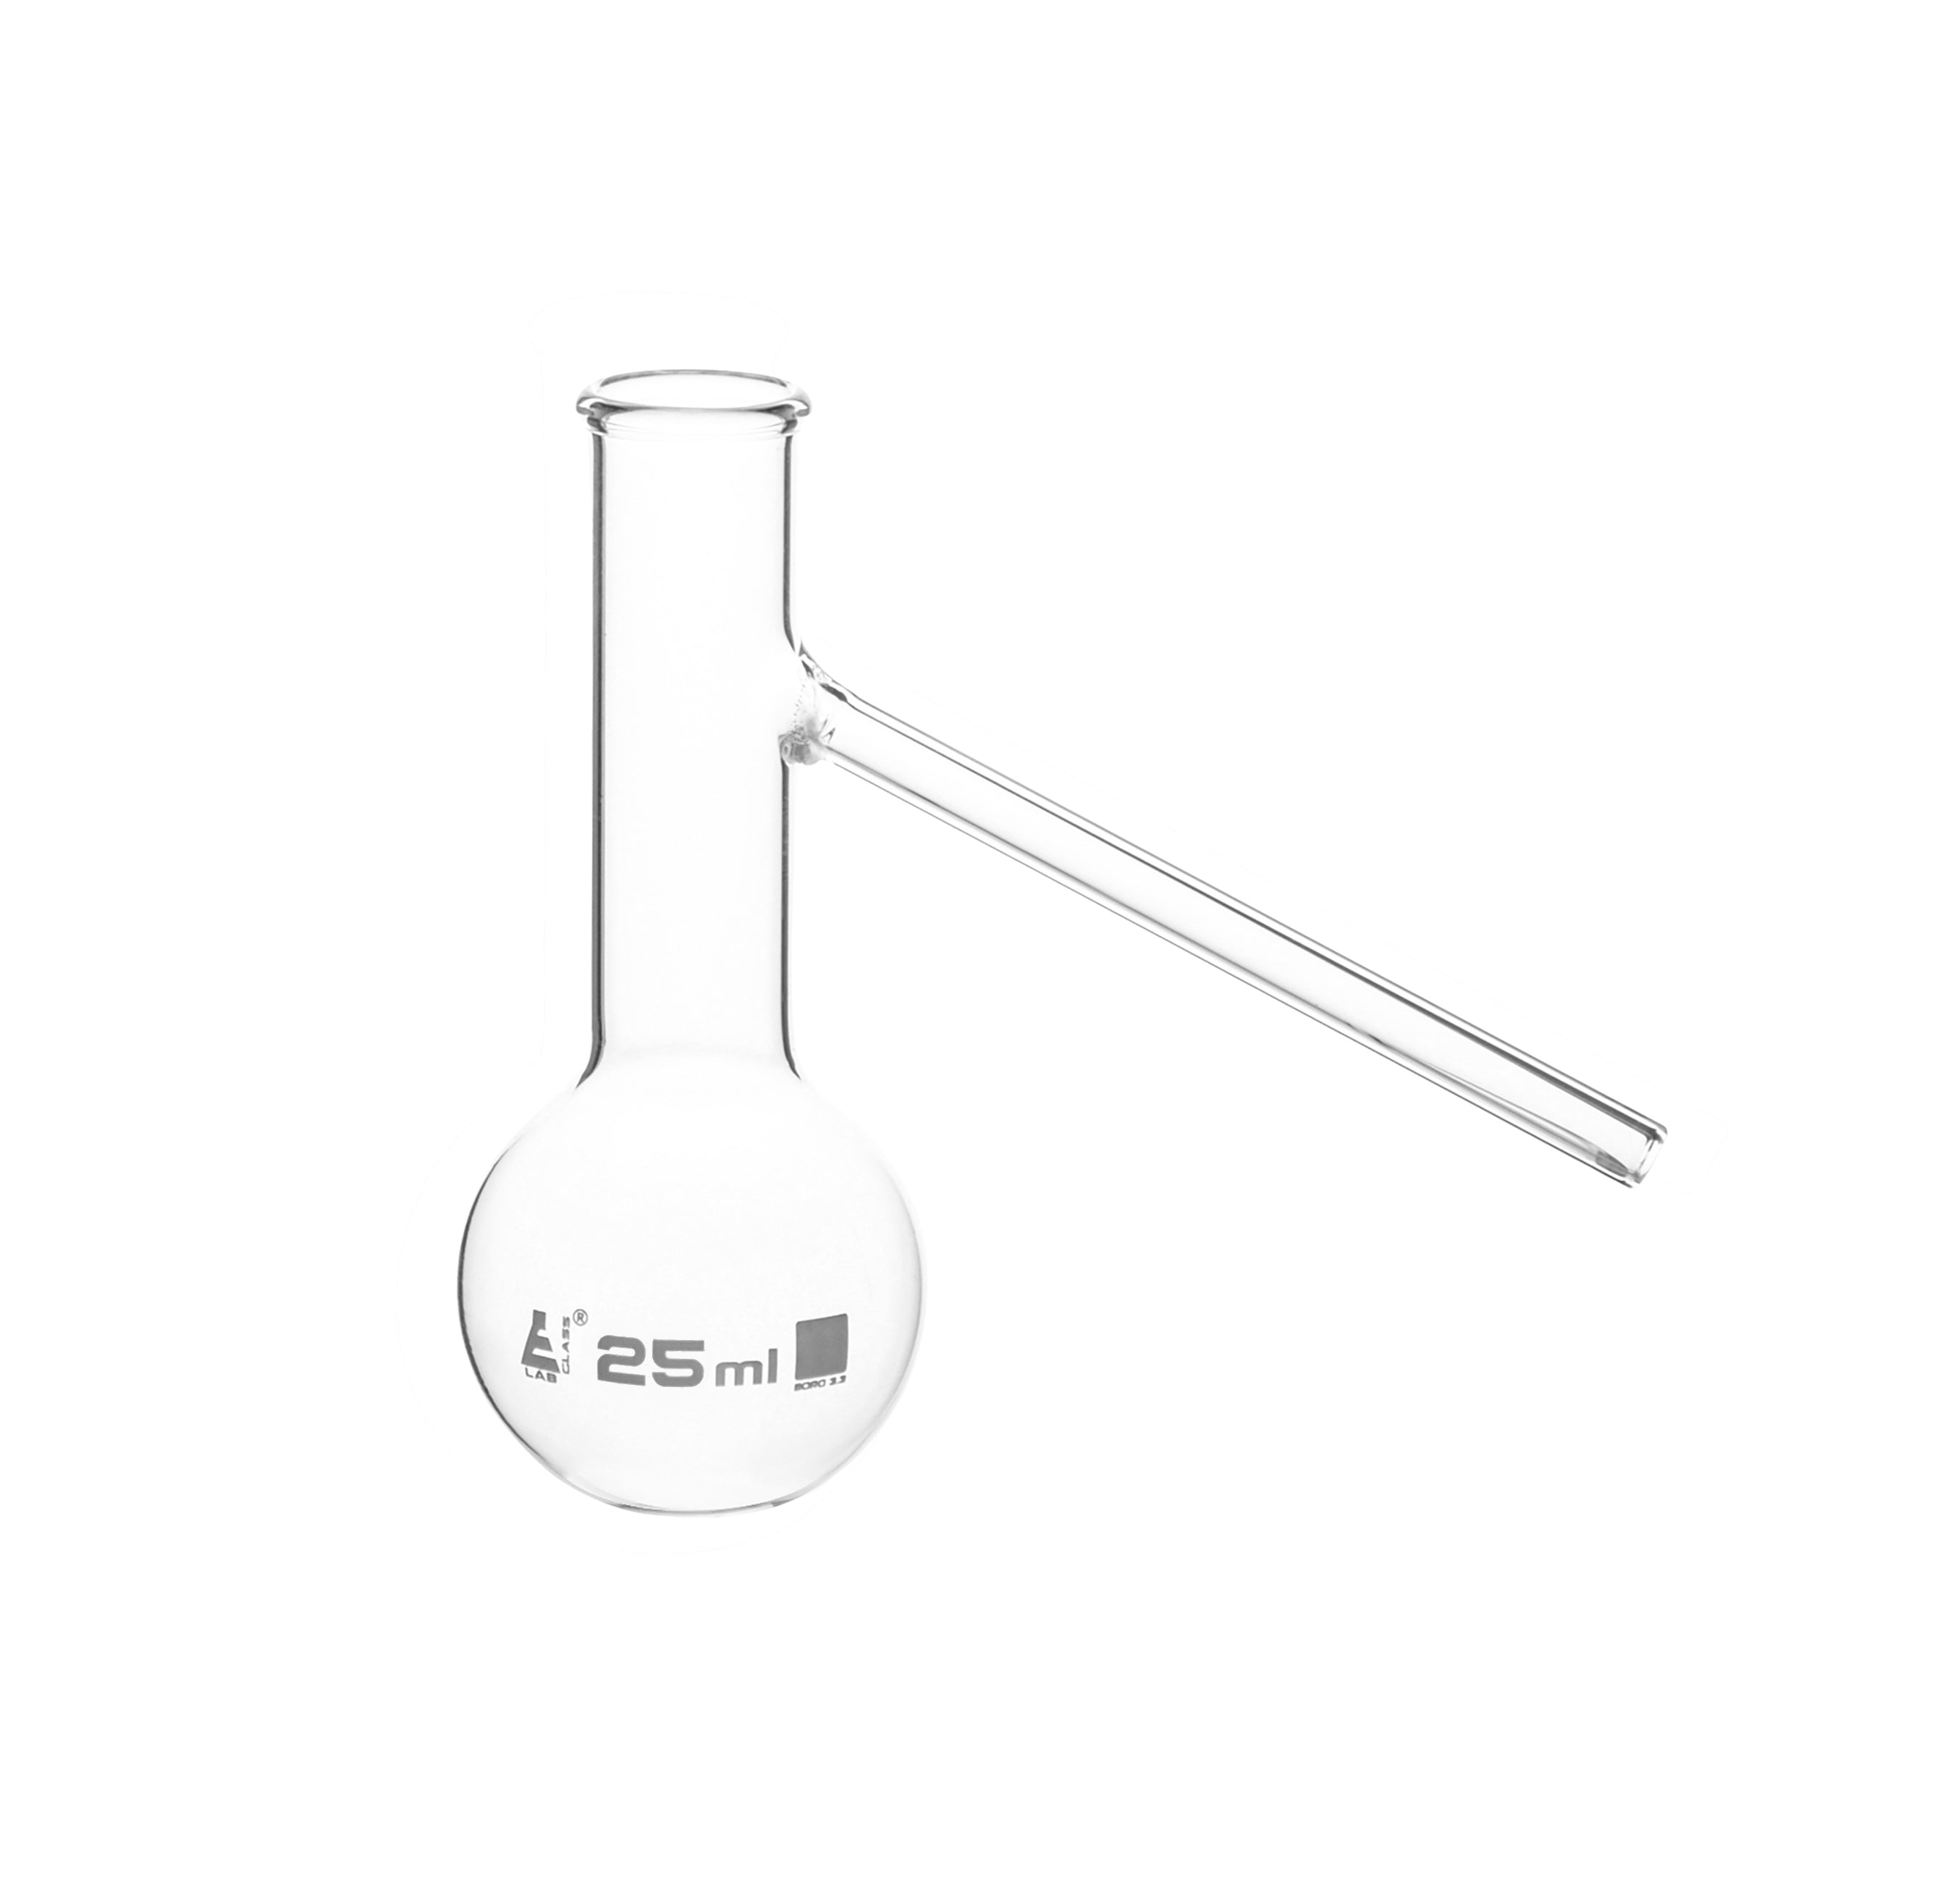 Borosilicate Round Bottom Distilling Flask with Side Arm, 25ml, Autoclavable